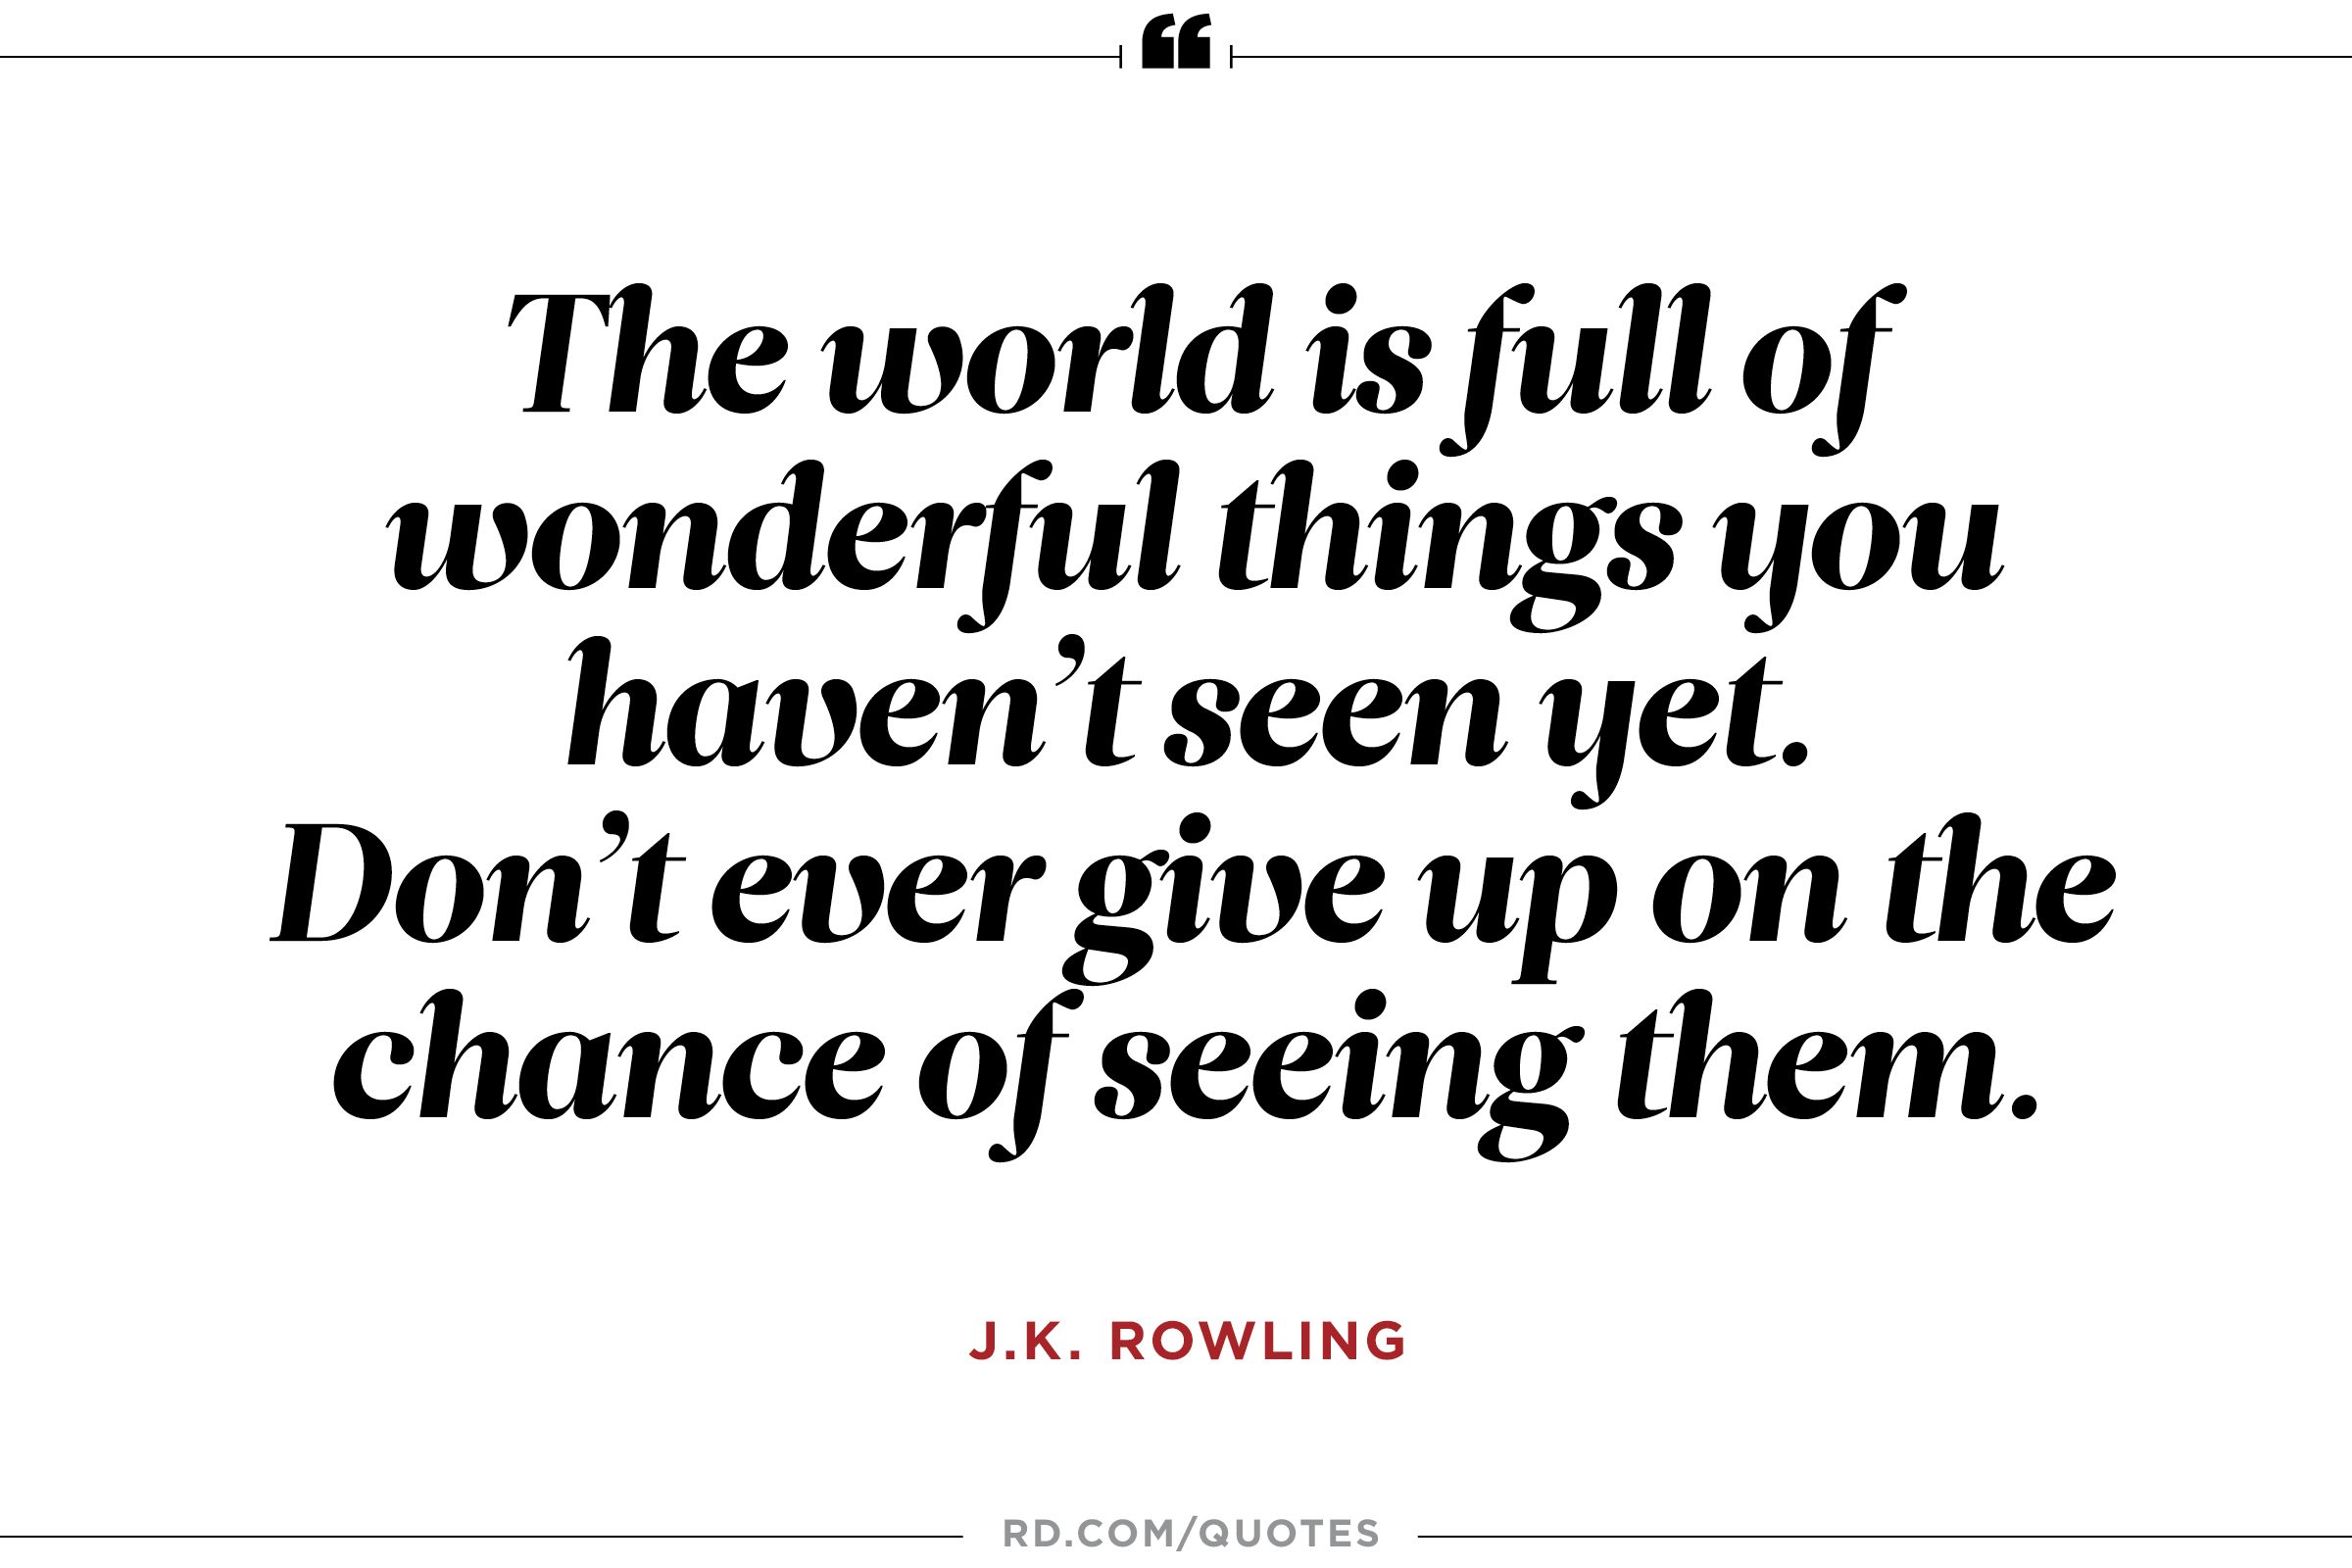 8 J.K. Rowling Quotes to Motivate You Through Any Slump